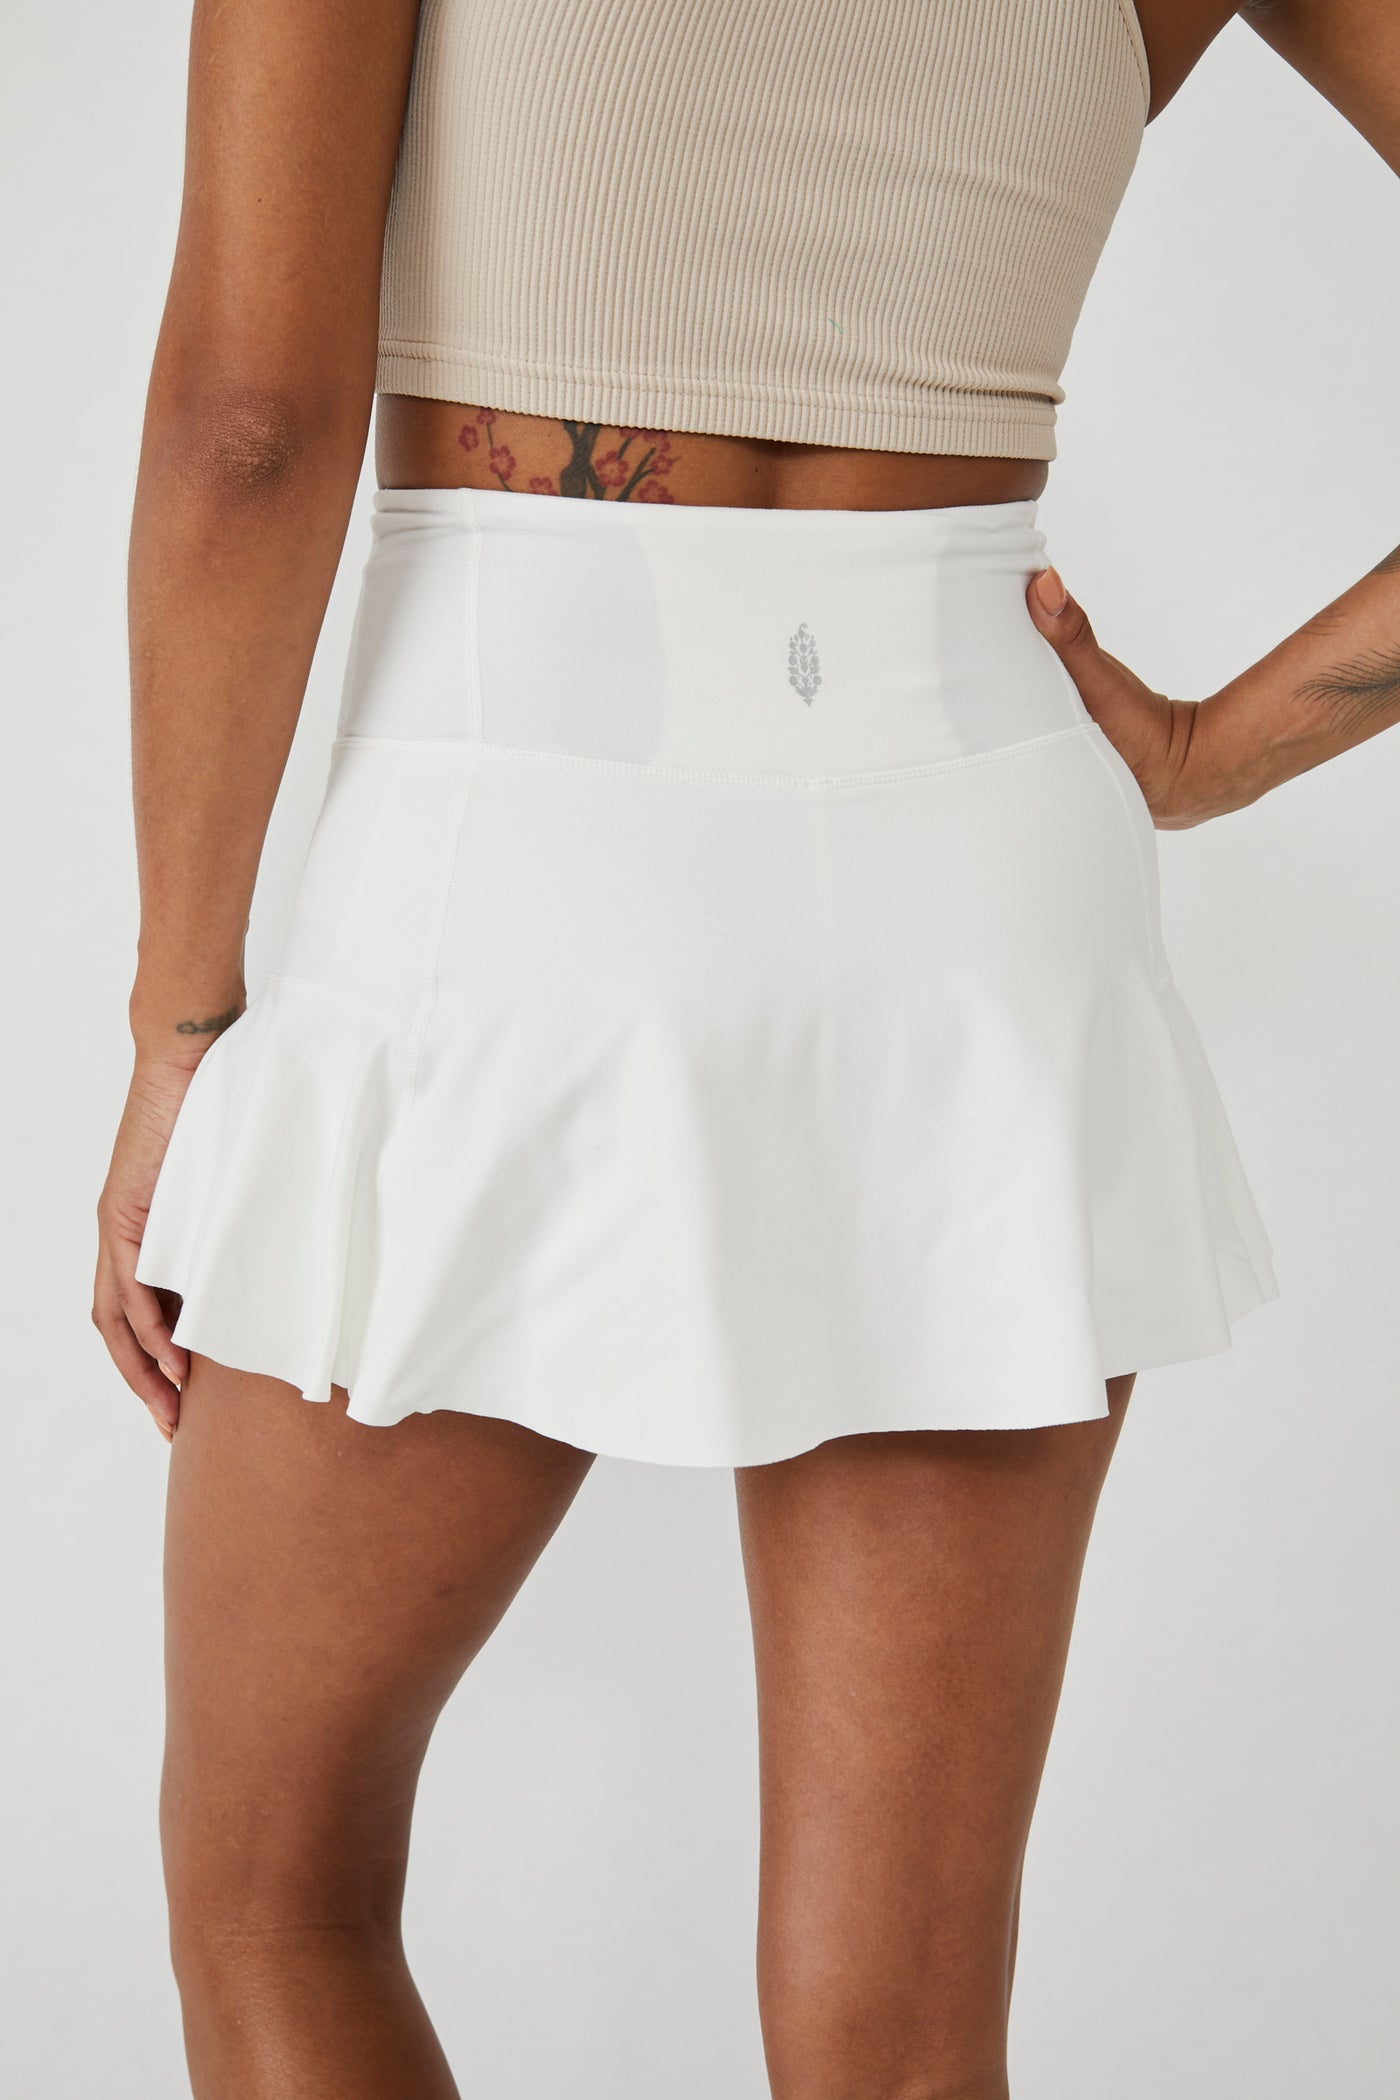 Check Out My Topspin Skirt - White